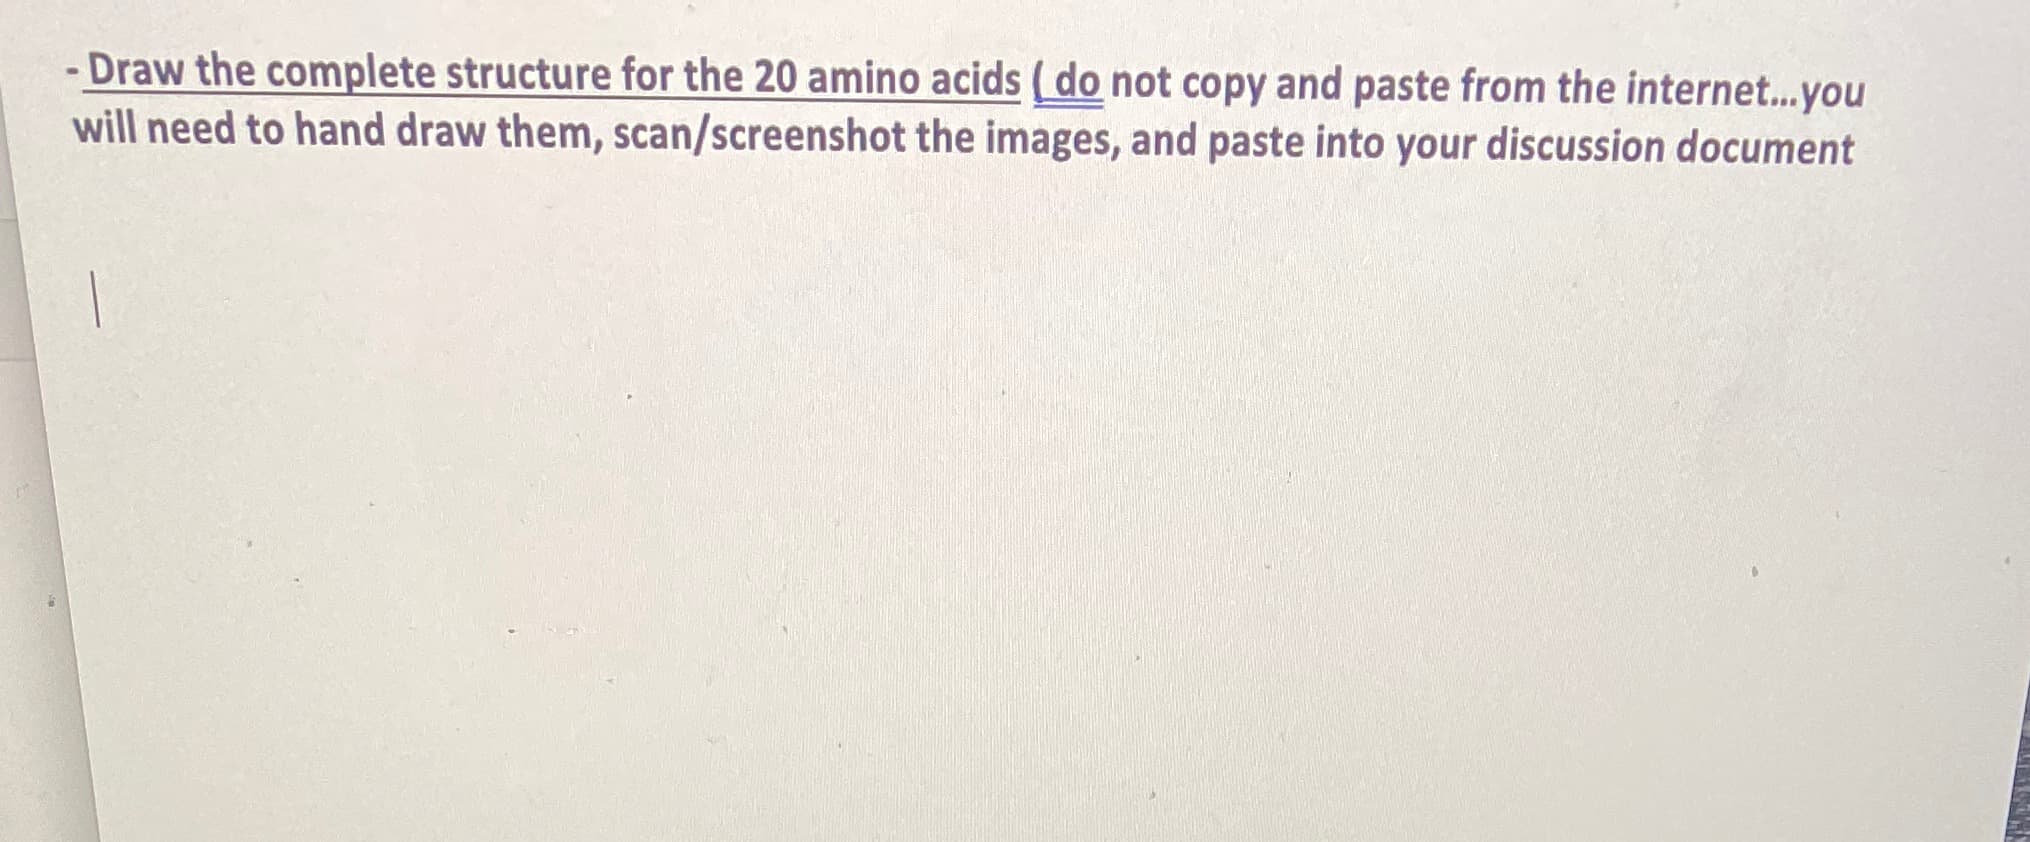 Draw the complete structure for the 20 amino acids
